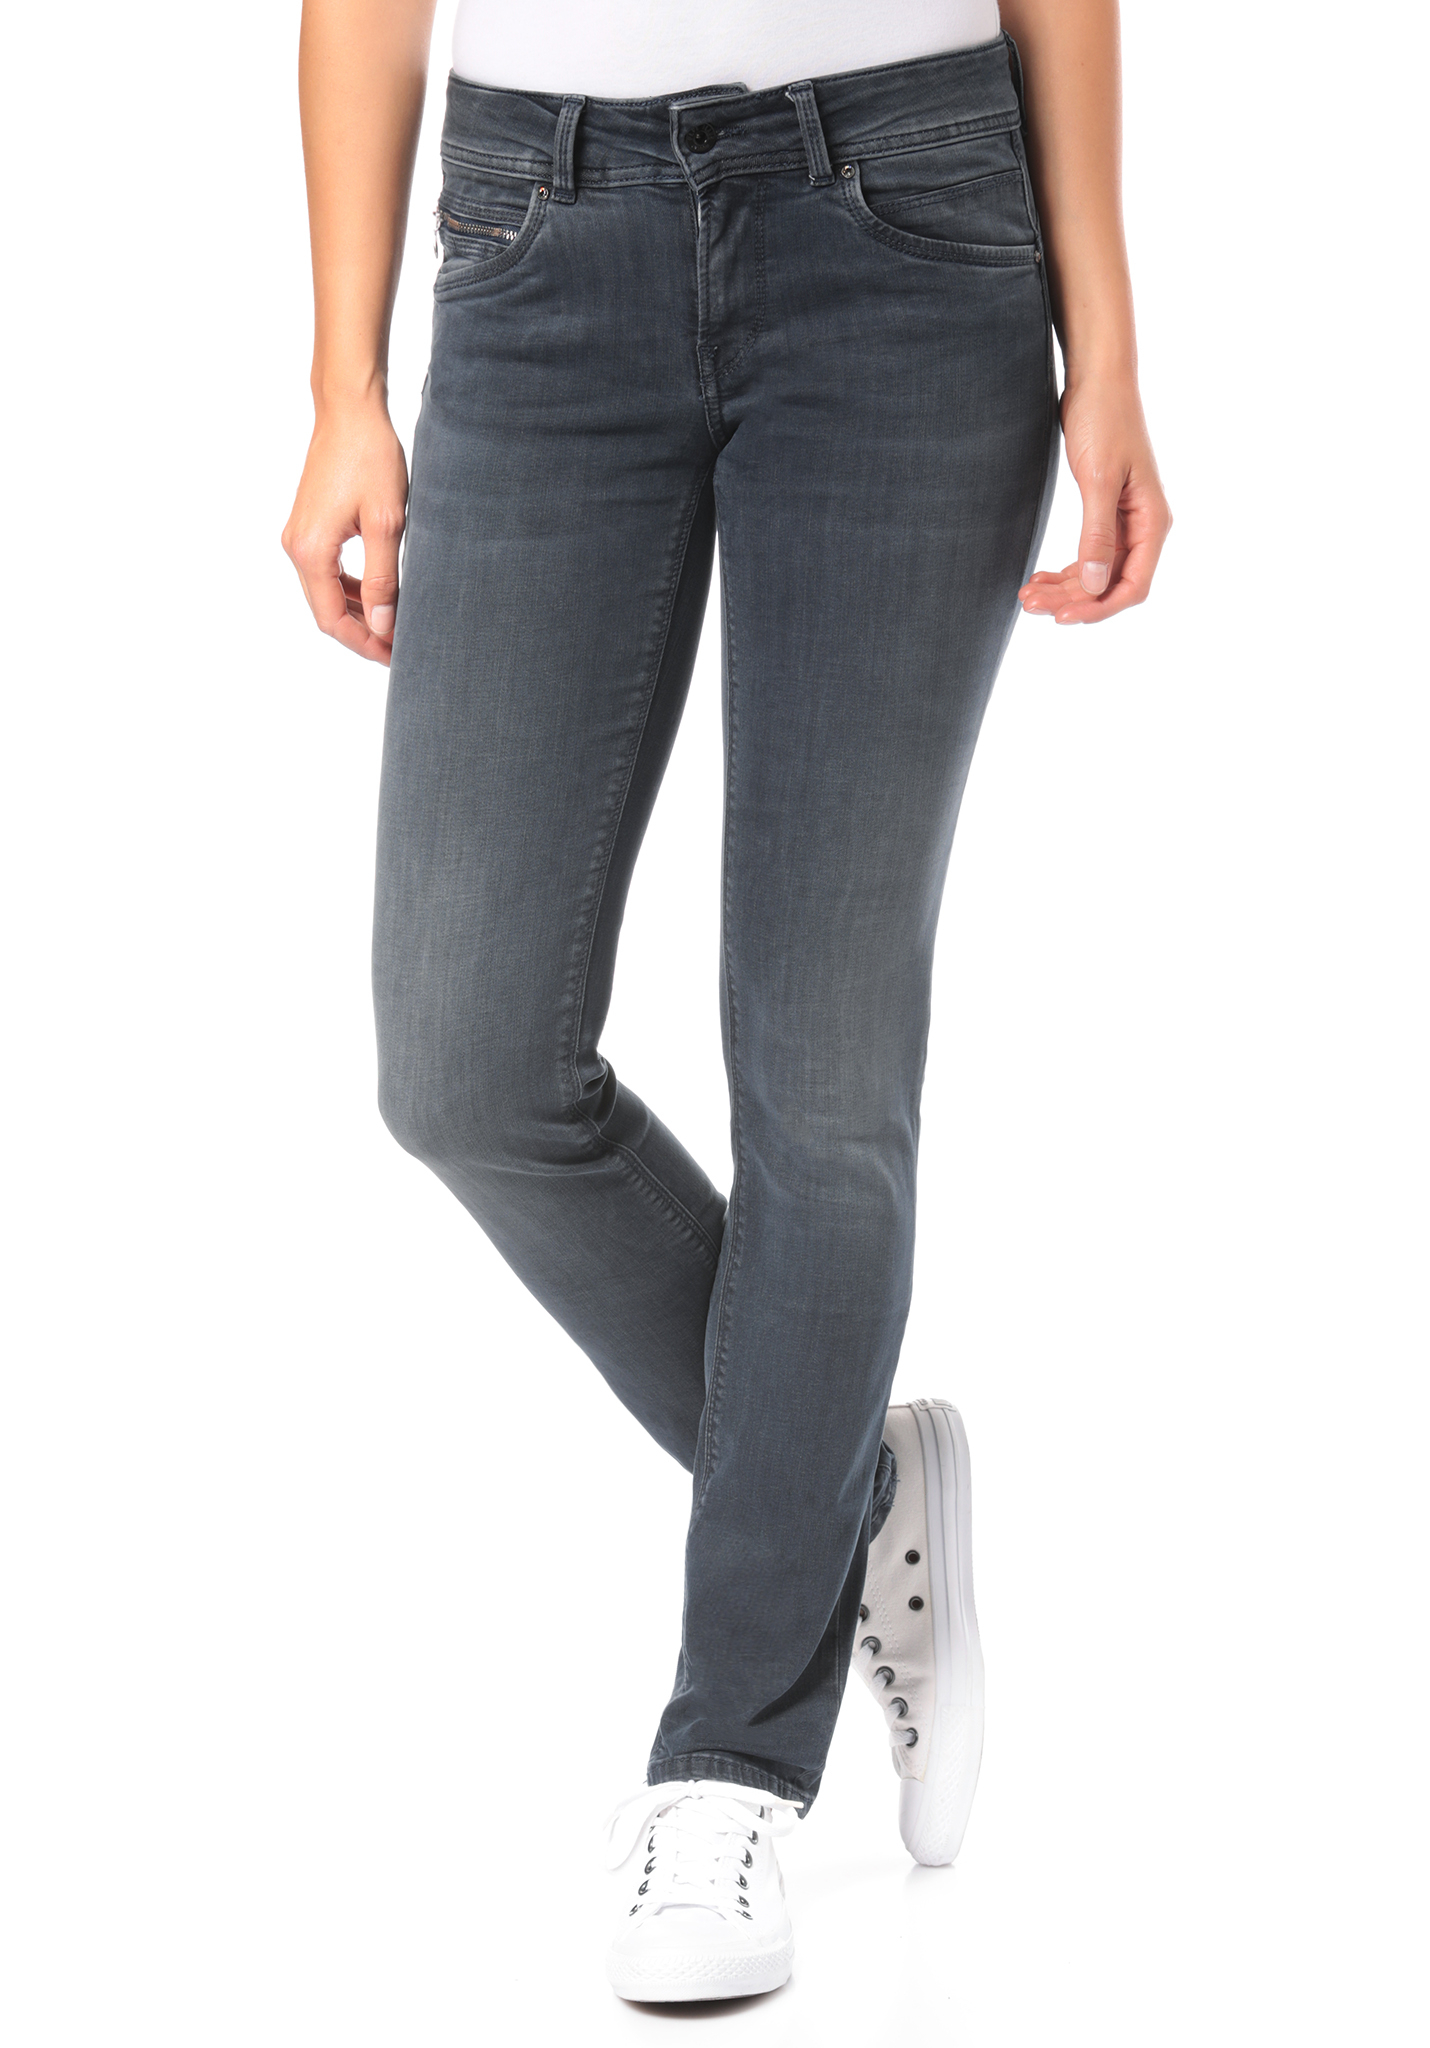 Pepe Jeans New Brooke Skinny Jeans jeans 24/32